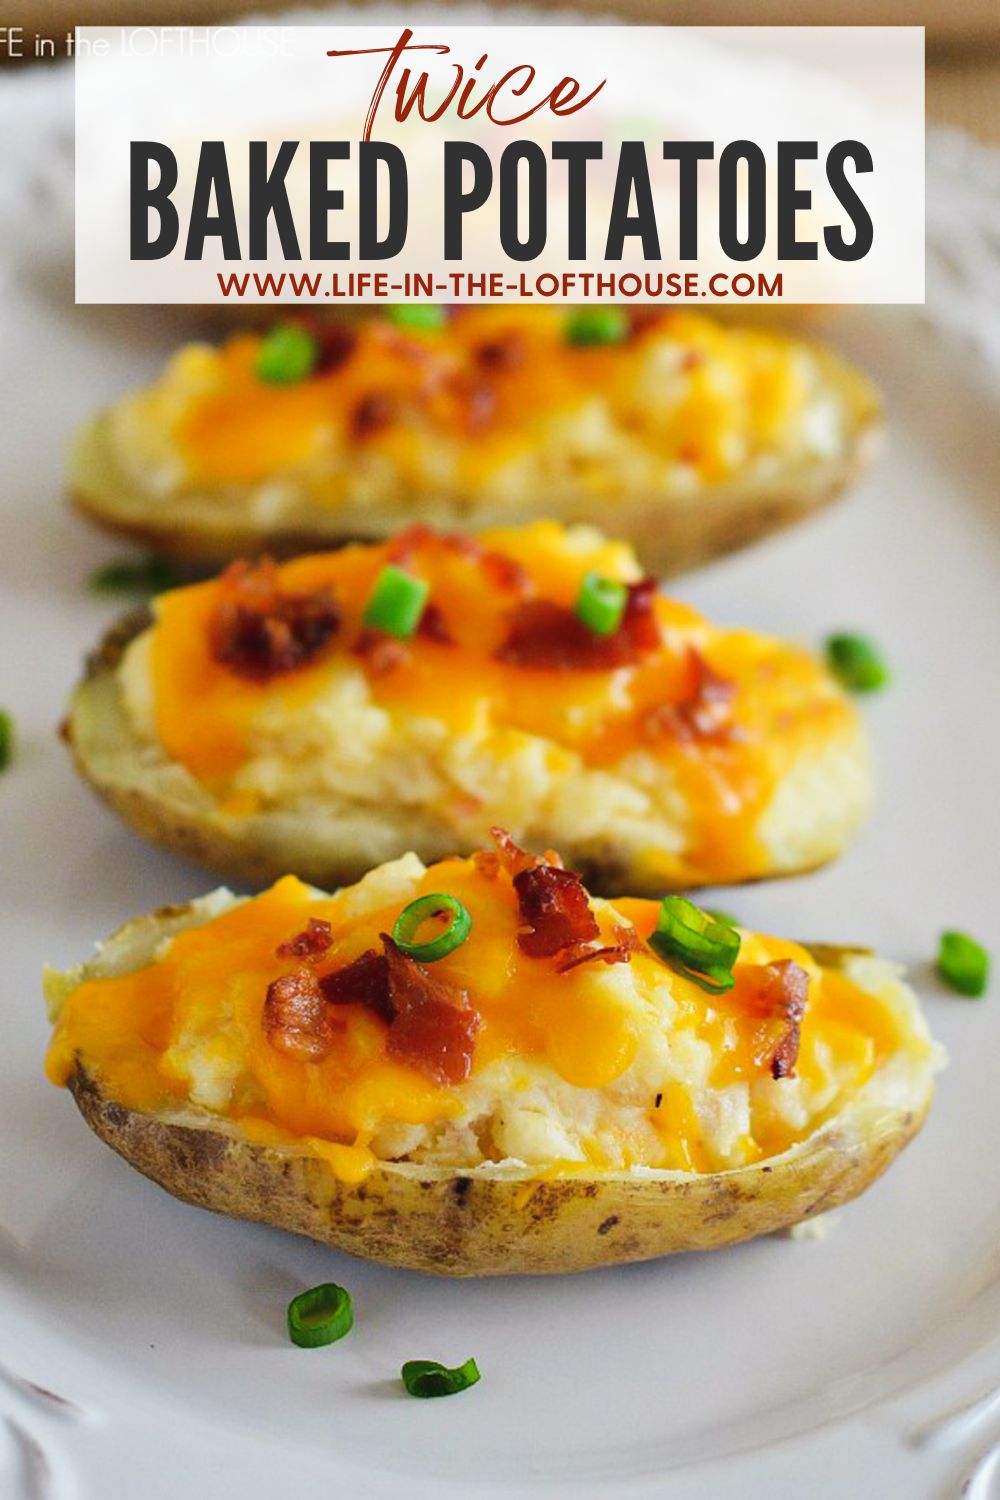 Twice Baked Potatoes are loaded with cheese, bacon and green onion. Life-in-the-Lofthouse.com